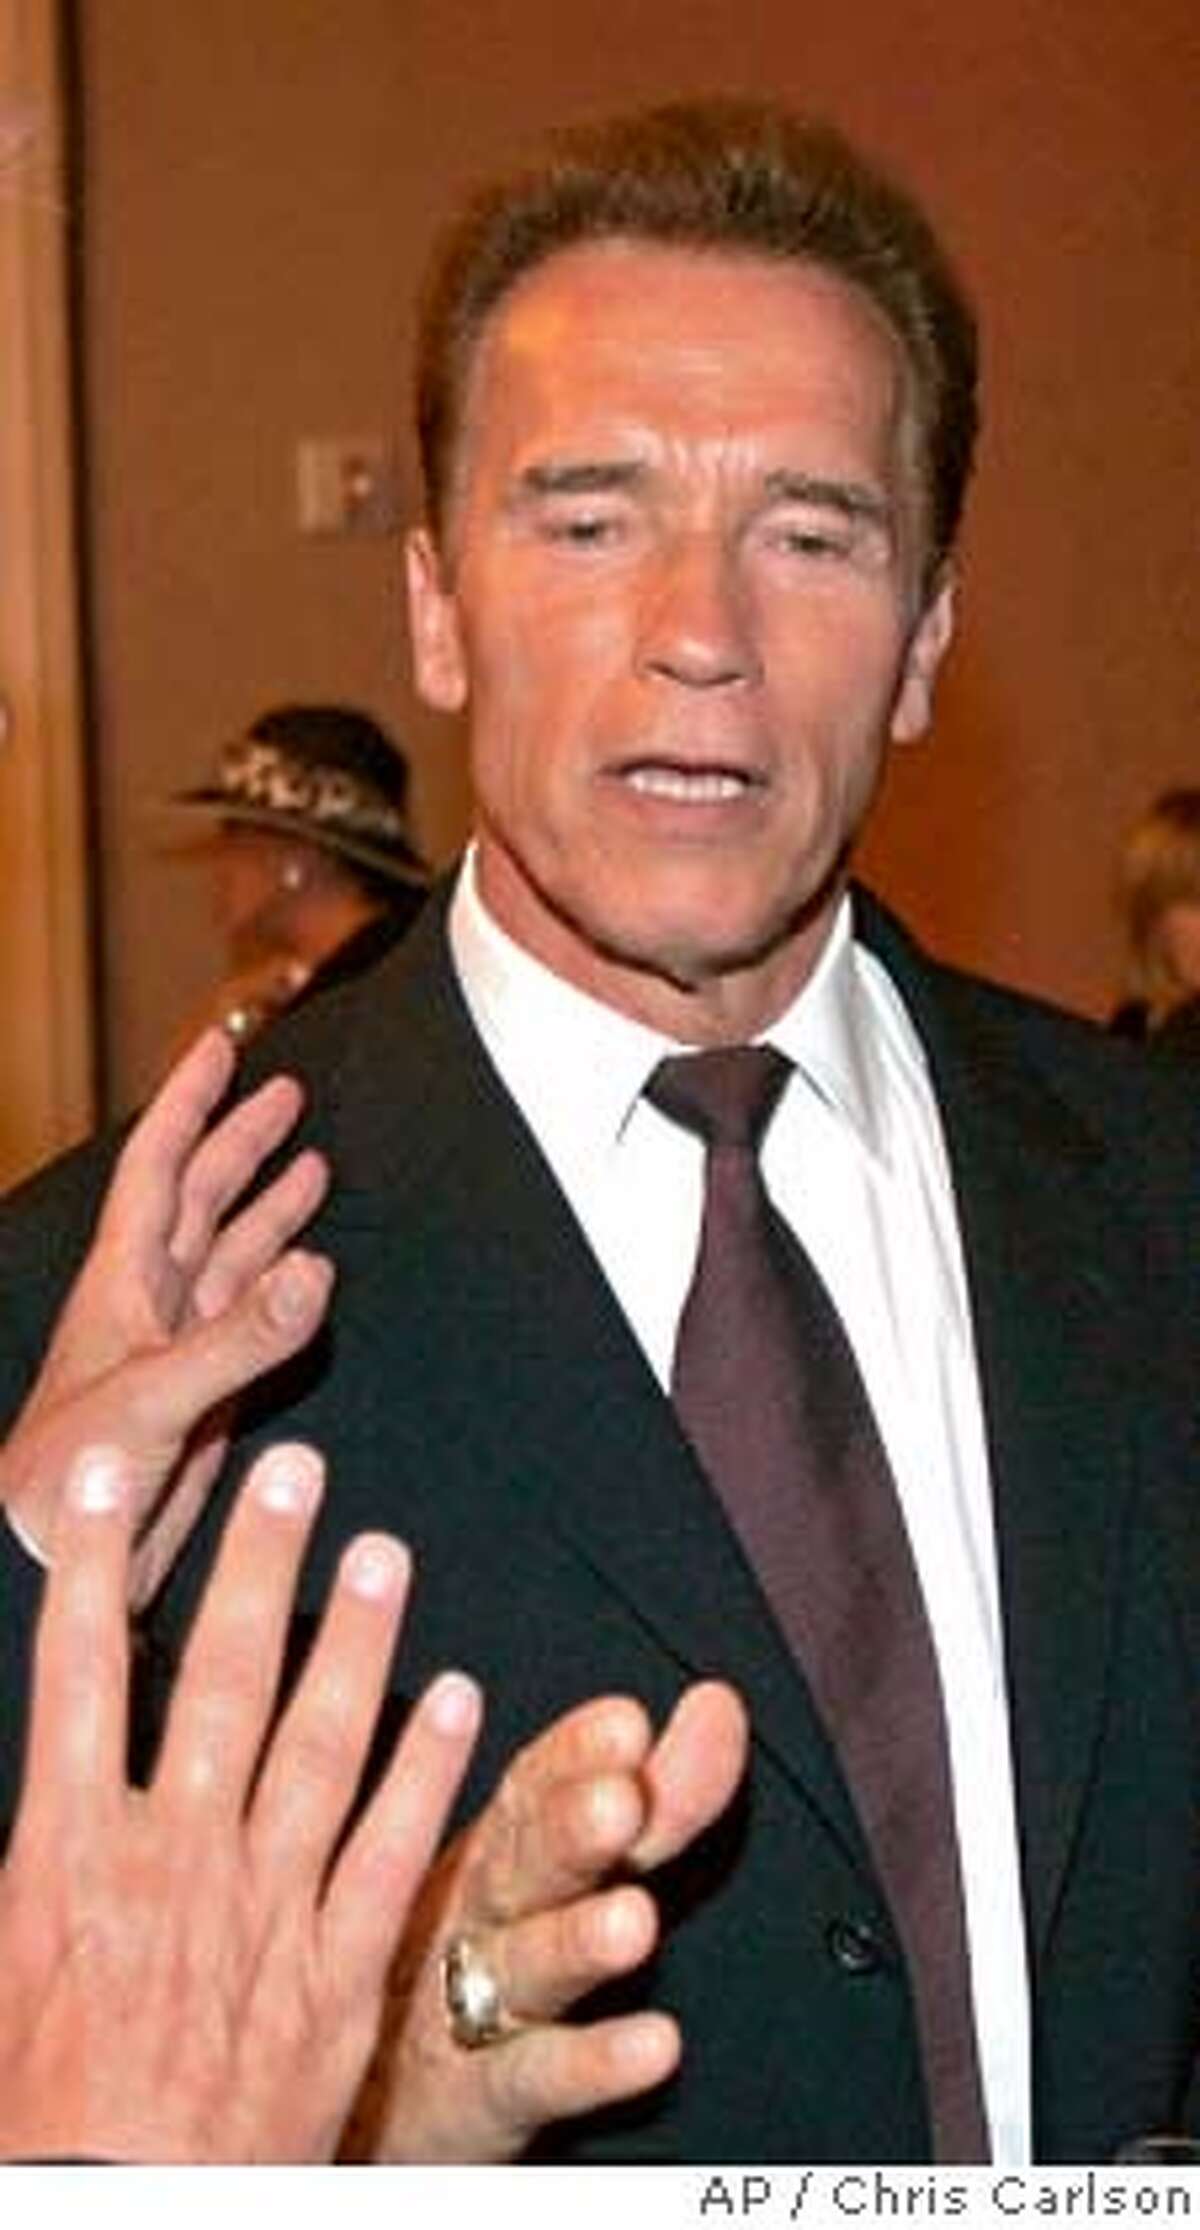 California Gov. Arnold Schwarzenegger talks with guests at a reception at the Beverly Hilton hotel after the funeral of entertainer and producer Merv Griffin in Beverly Hills, Calif., Friday, August 17, 2007. (AP Photo/Chris Carlson)